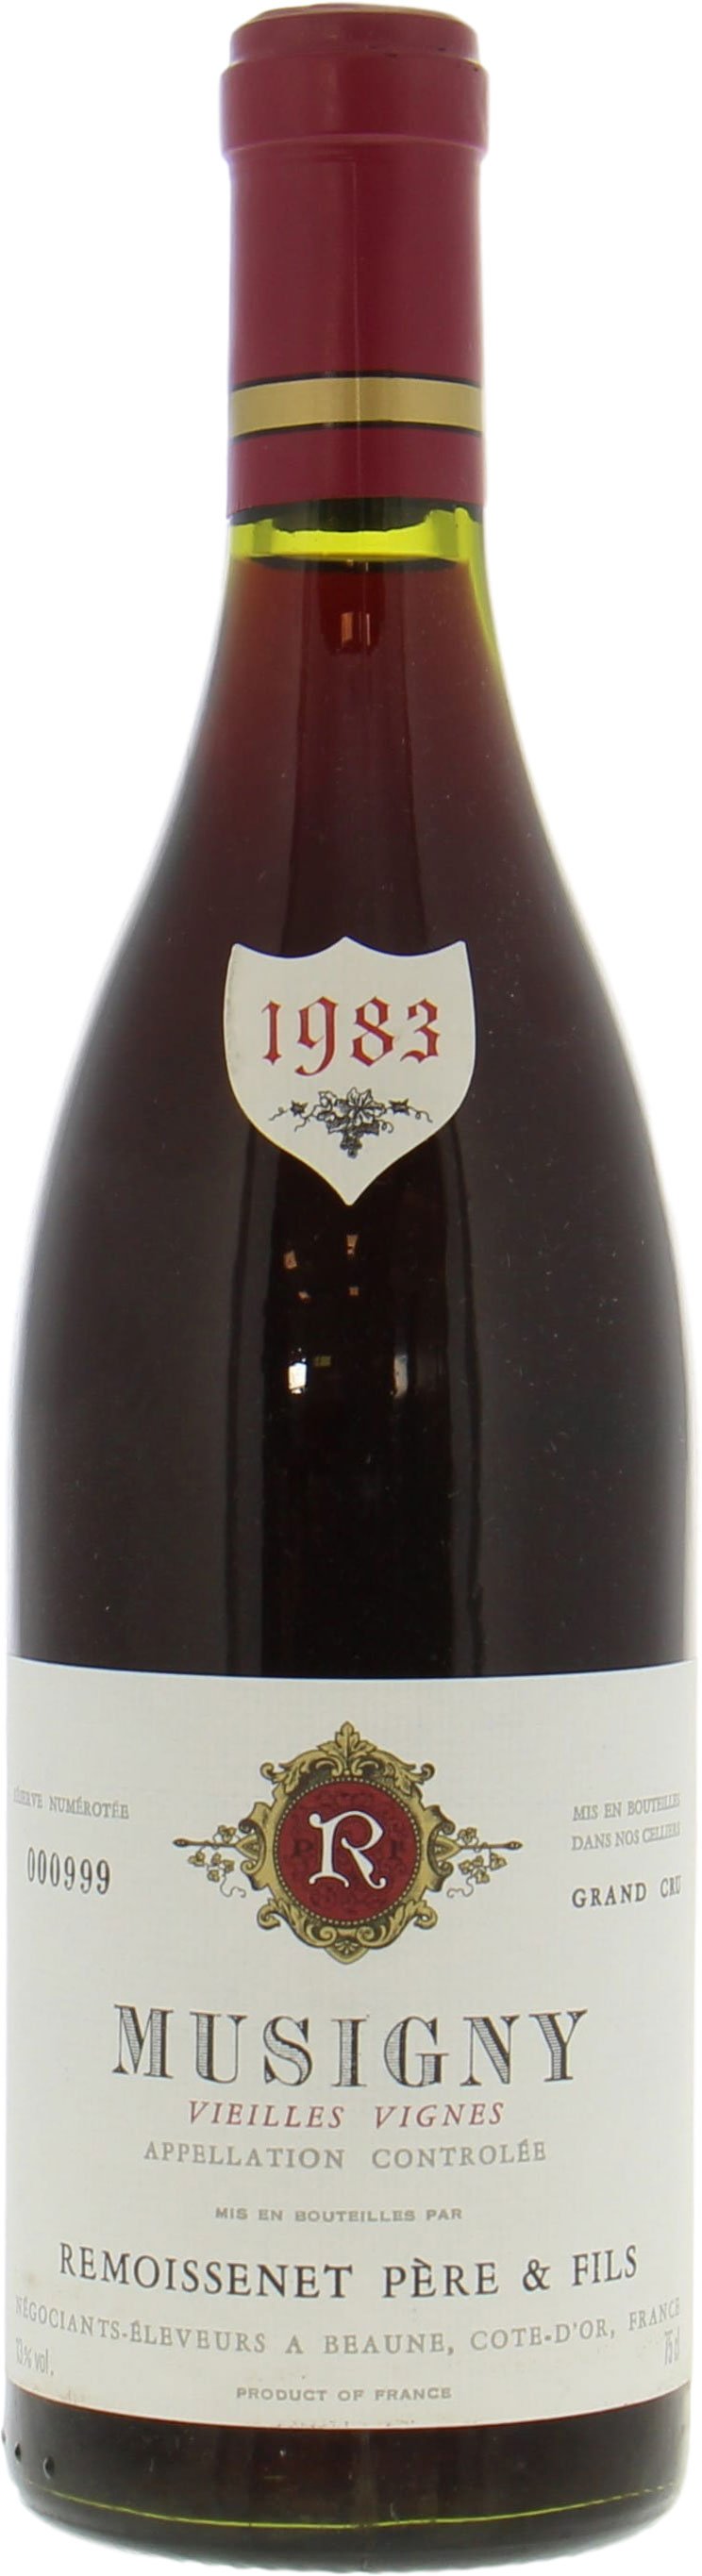 Remoissenet - Musigny 1983 Direct from Domaine